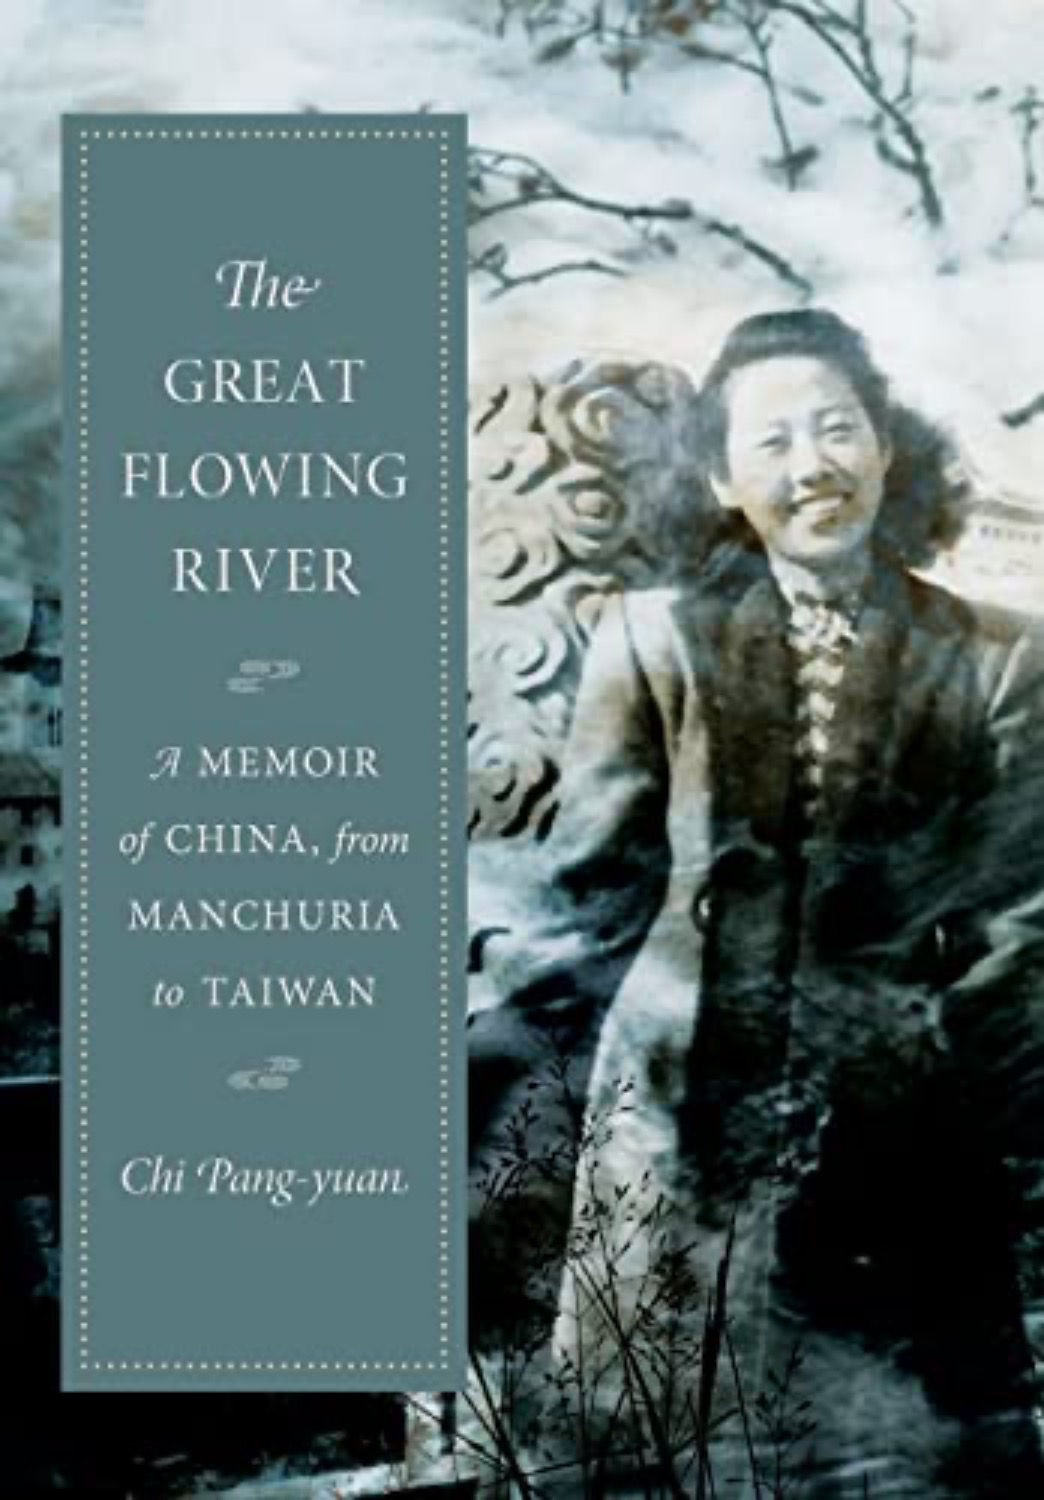 The Great Flowing River by Chi Pang-yuan